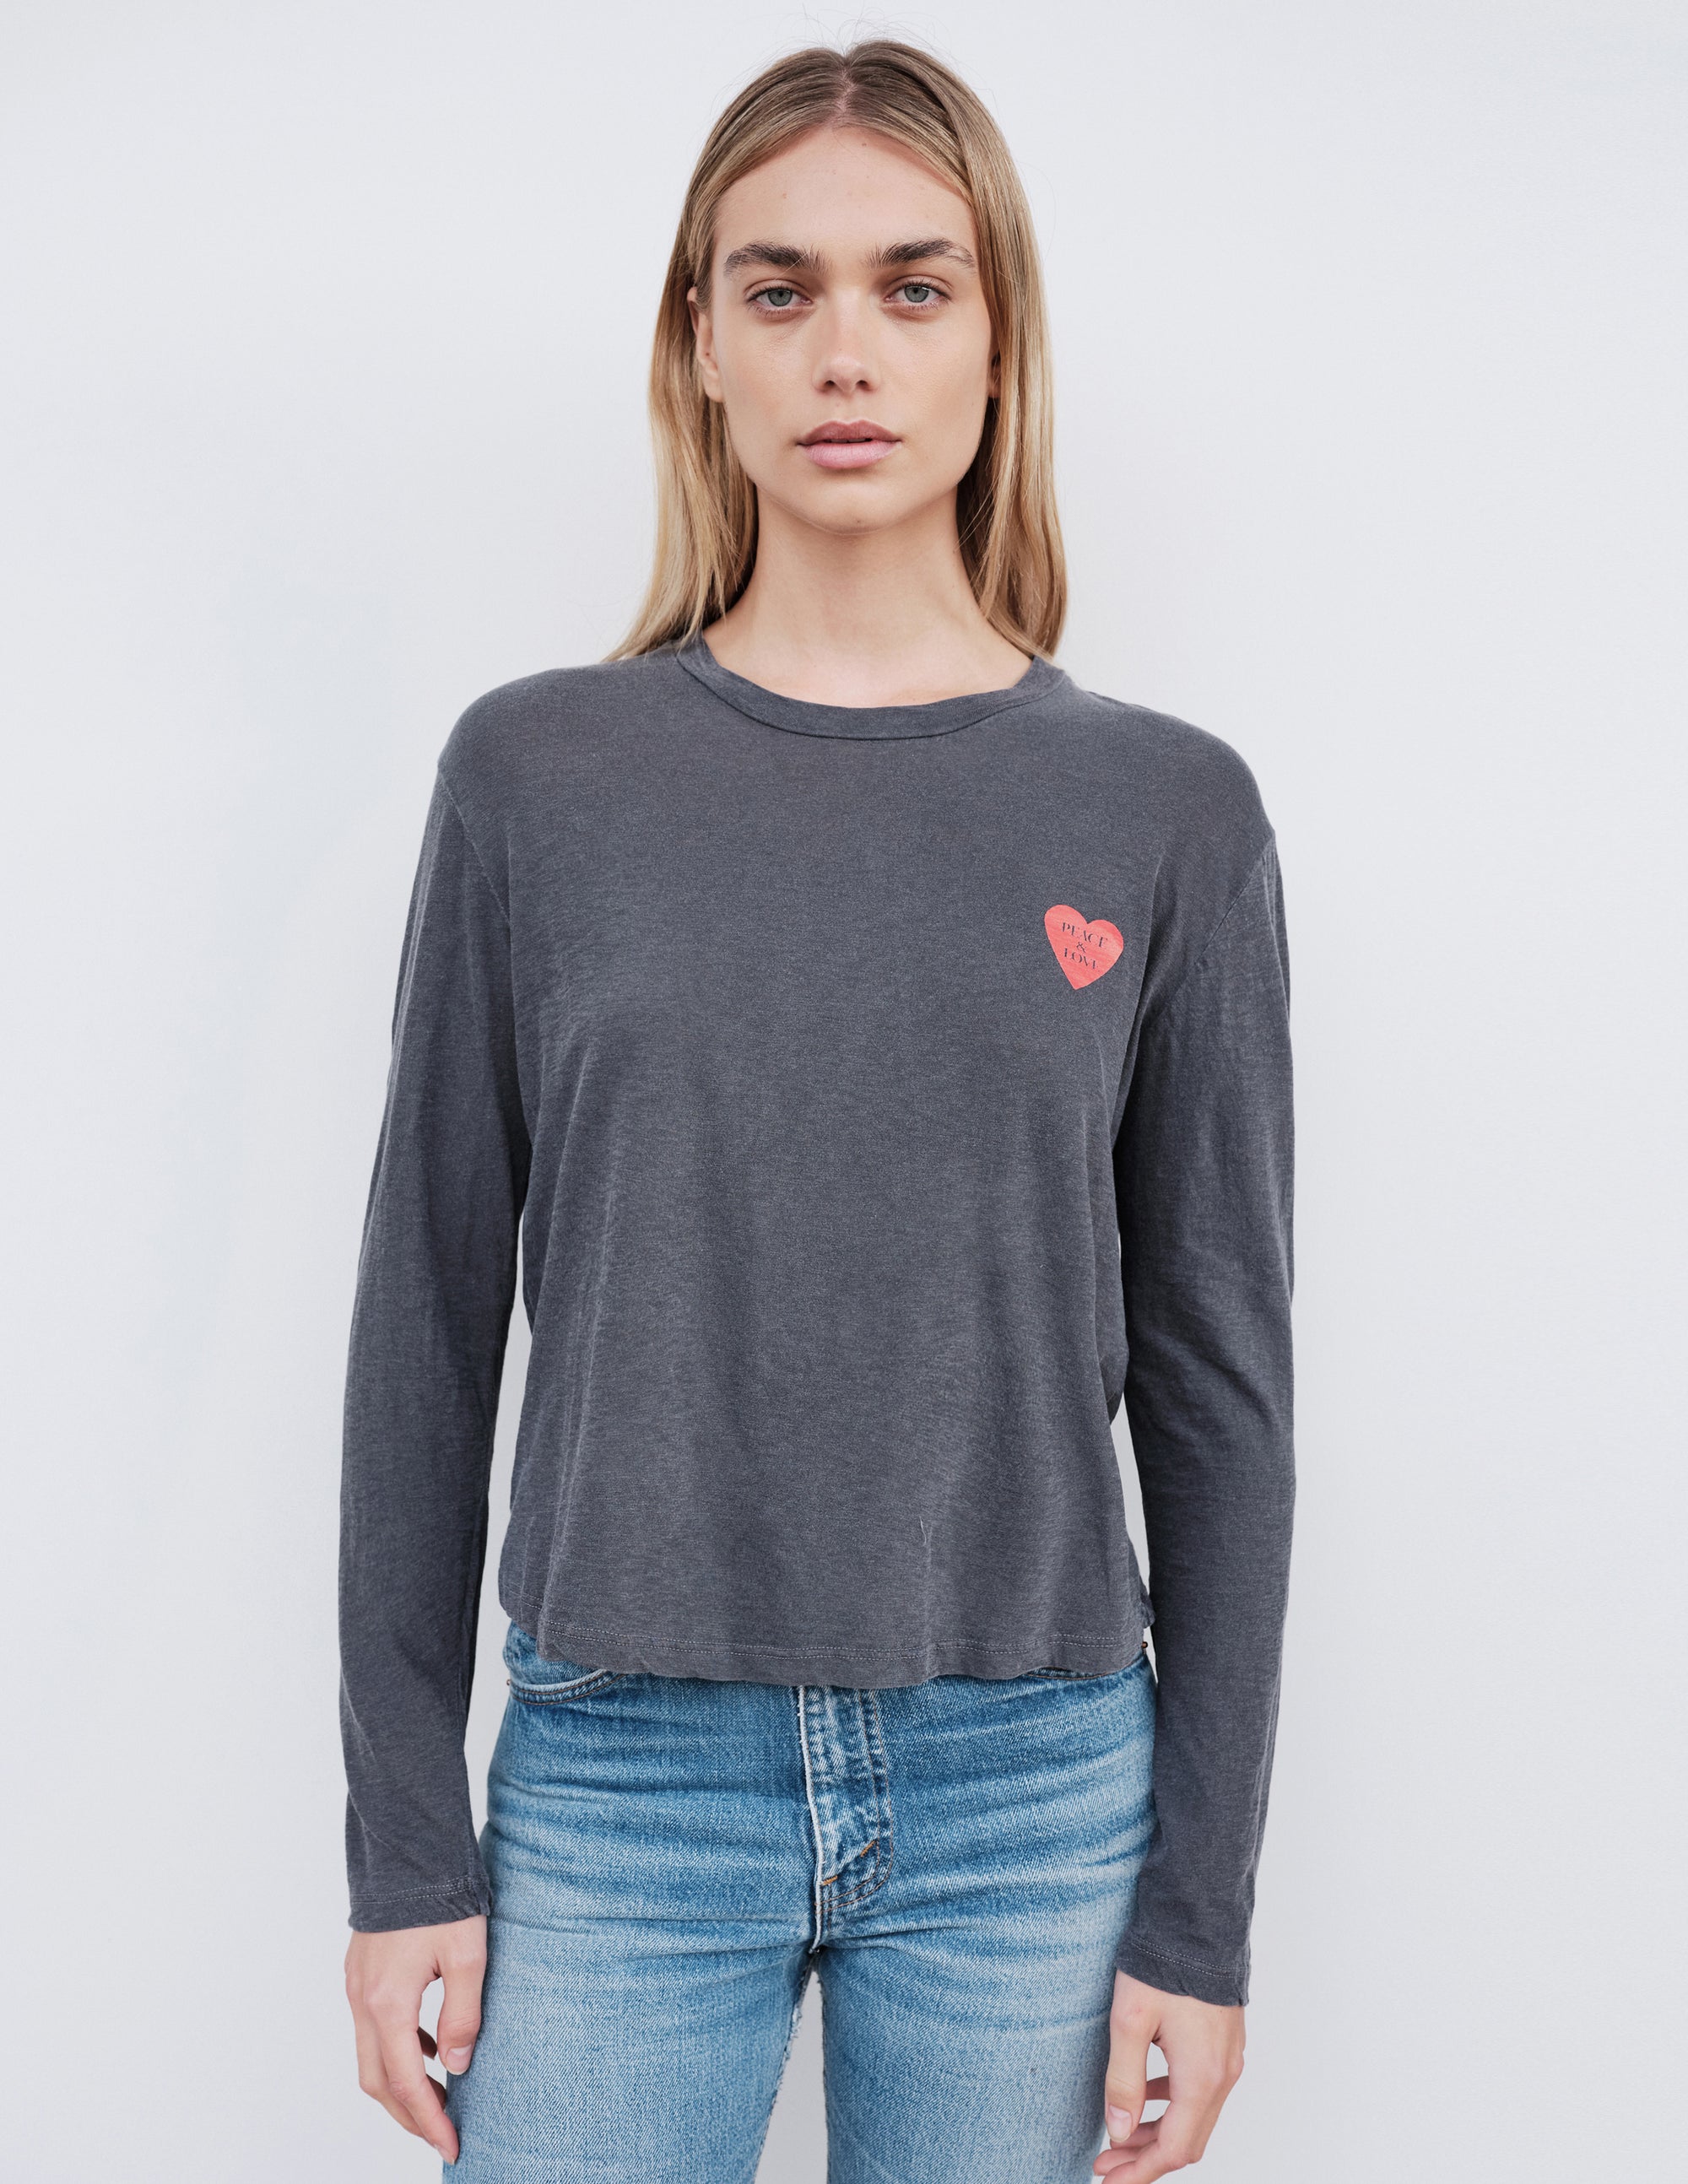 Sundry Peace & Love Boxy Long Sleeve in Pigment Black